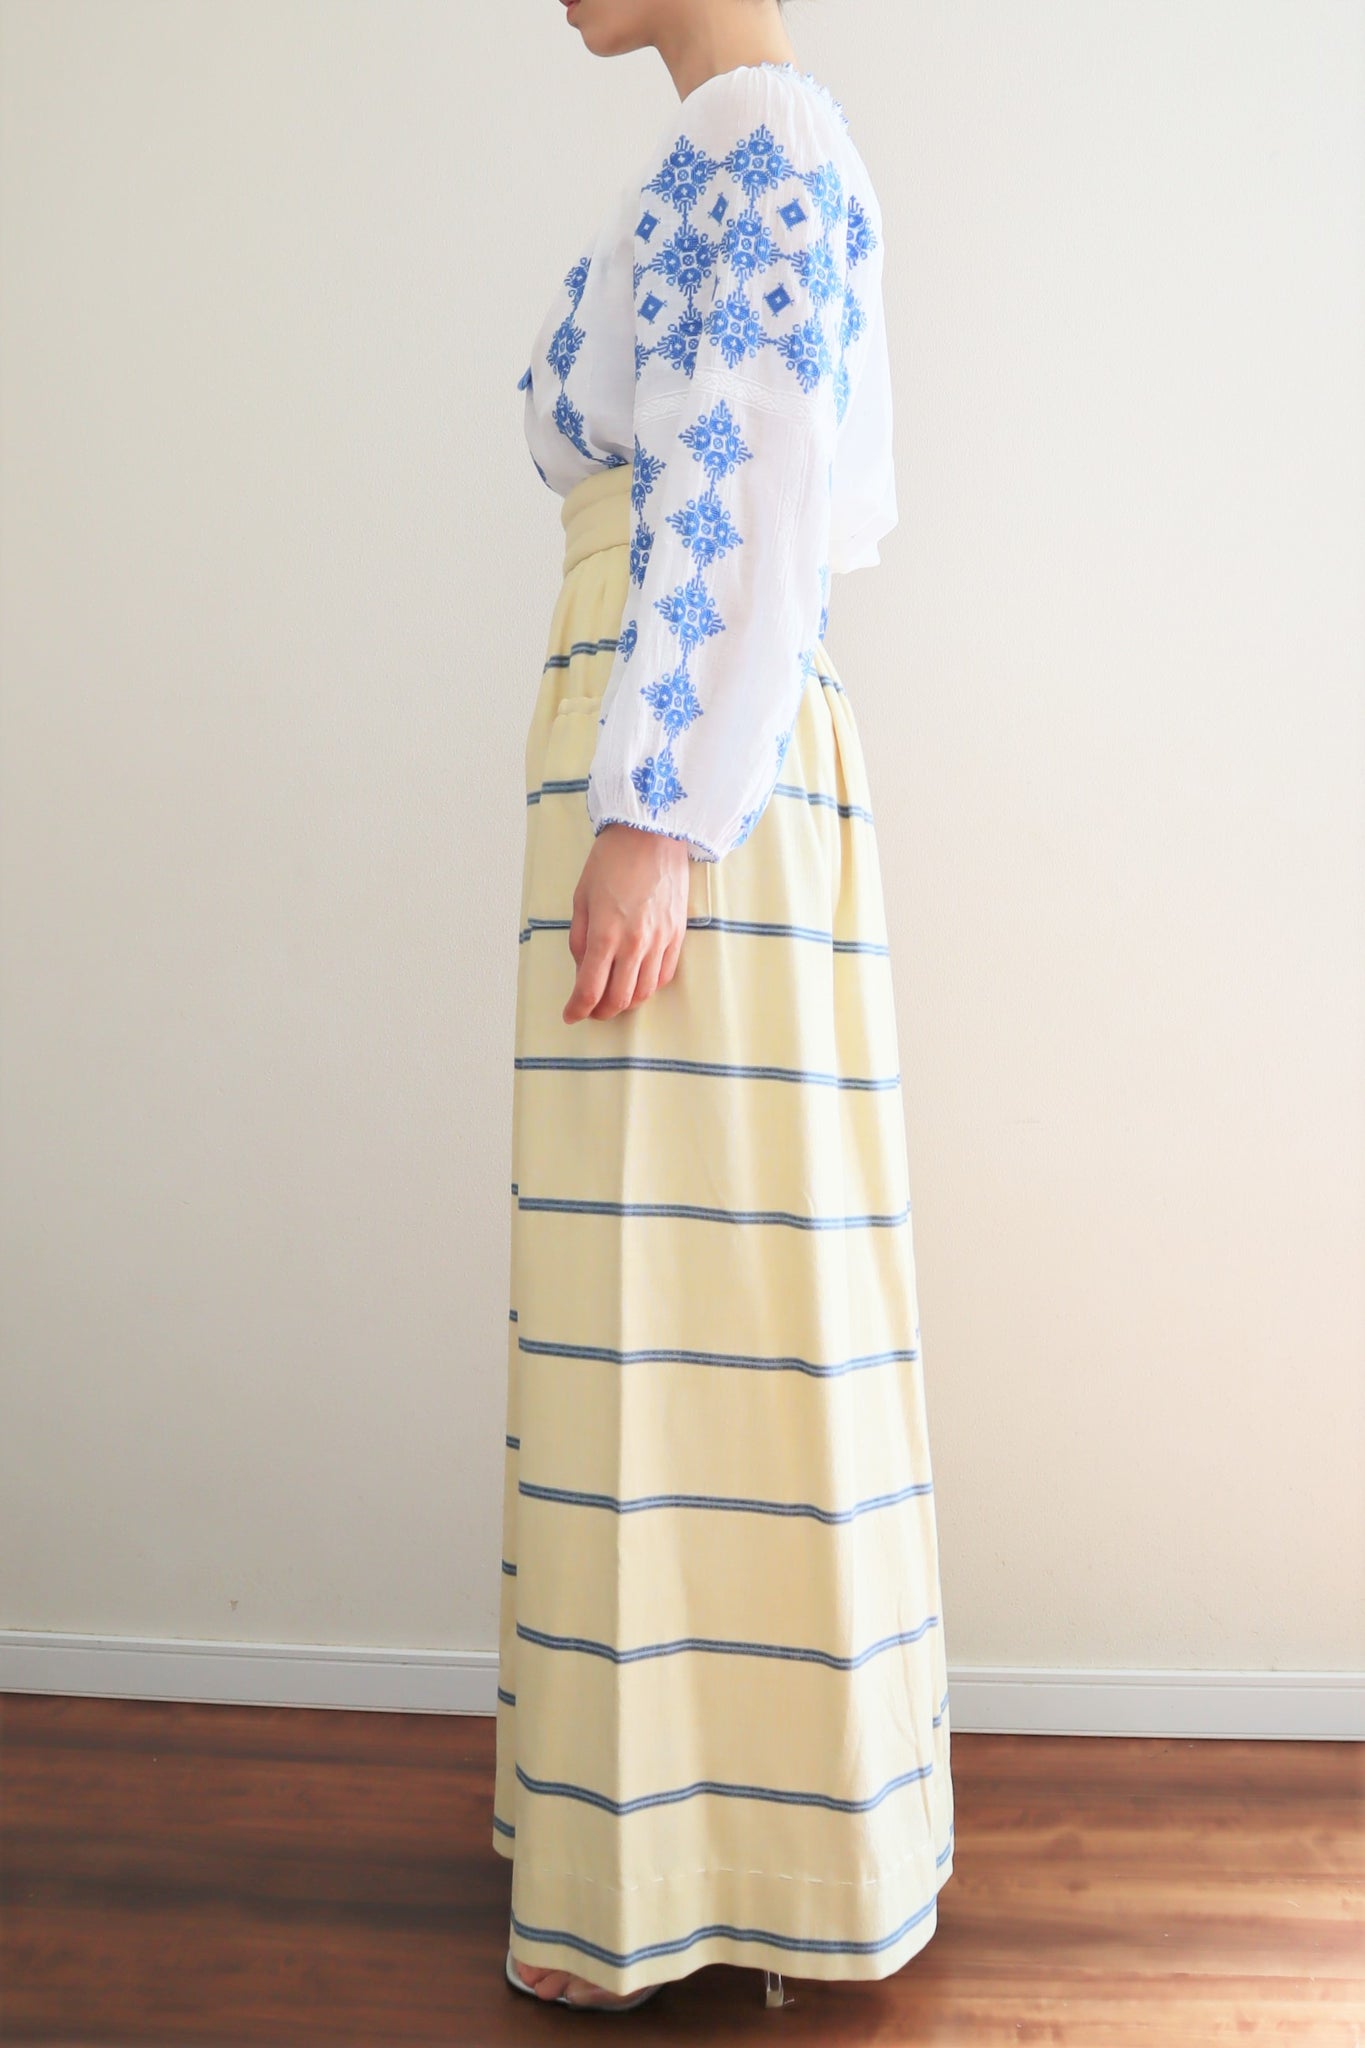 70s Homemade Quilted Waistband Canvas Maxi Skirt